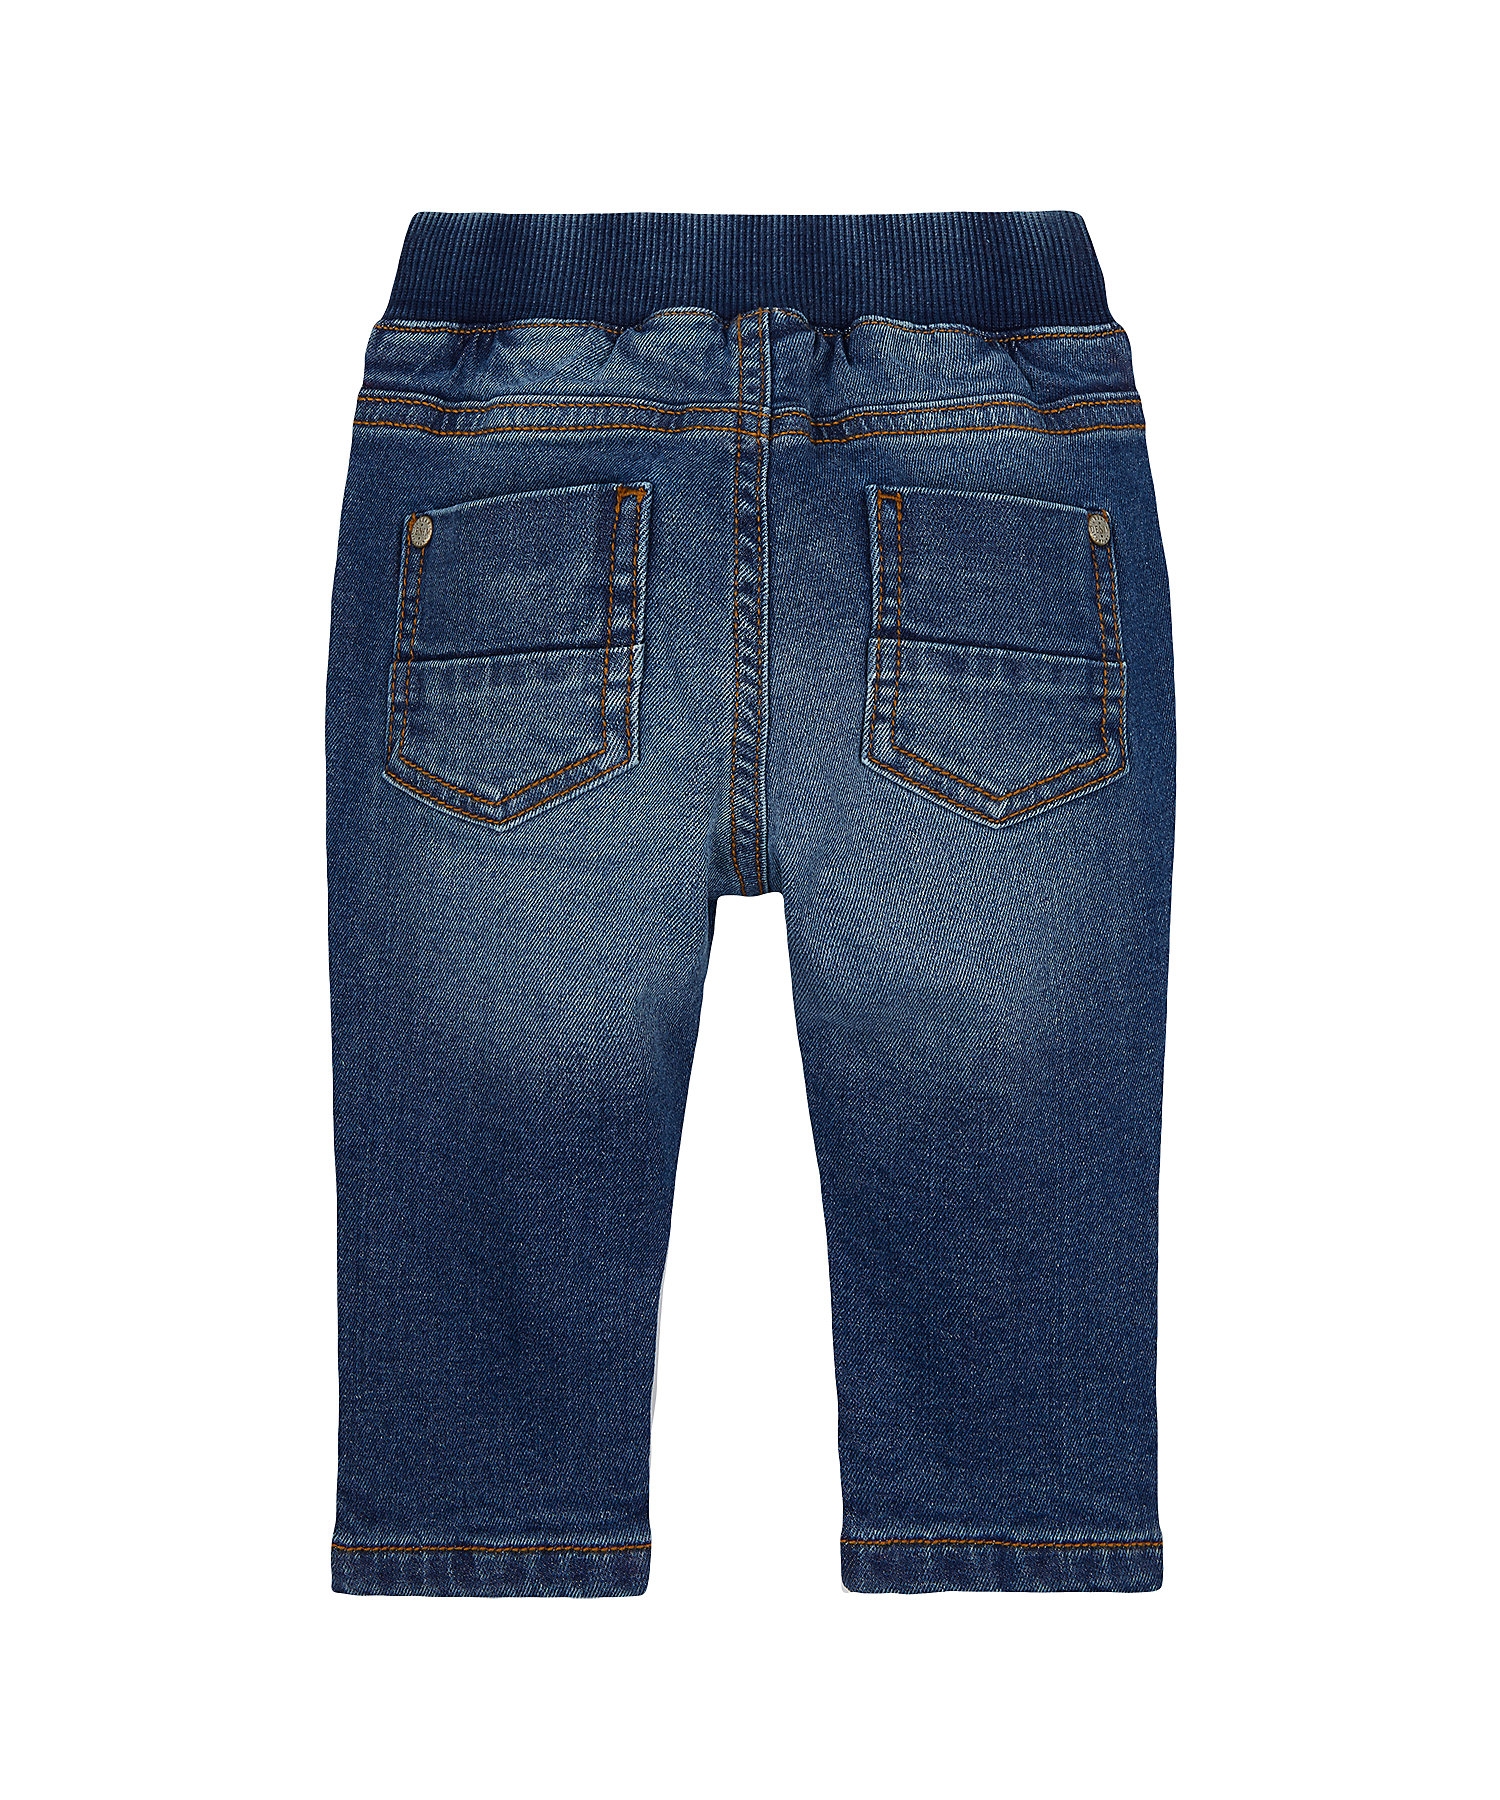 Mothercare | Boys Mid-Wash Jeans Fleece Lined - Blue 1